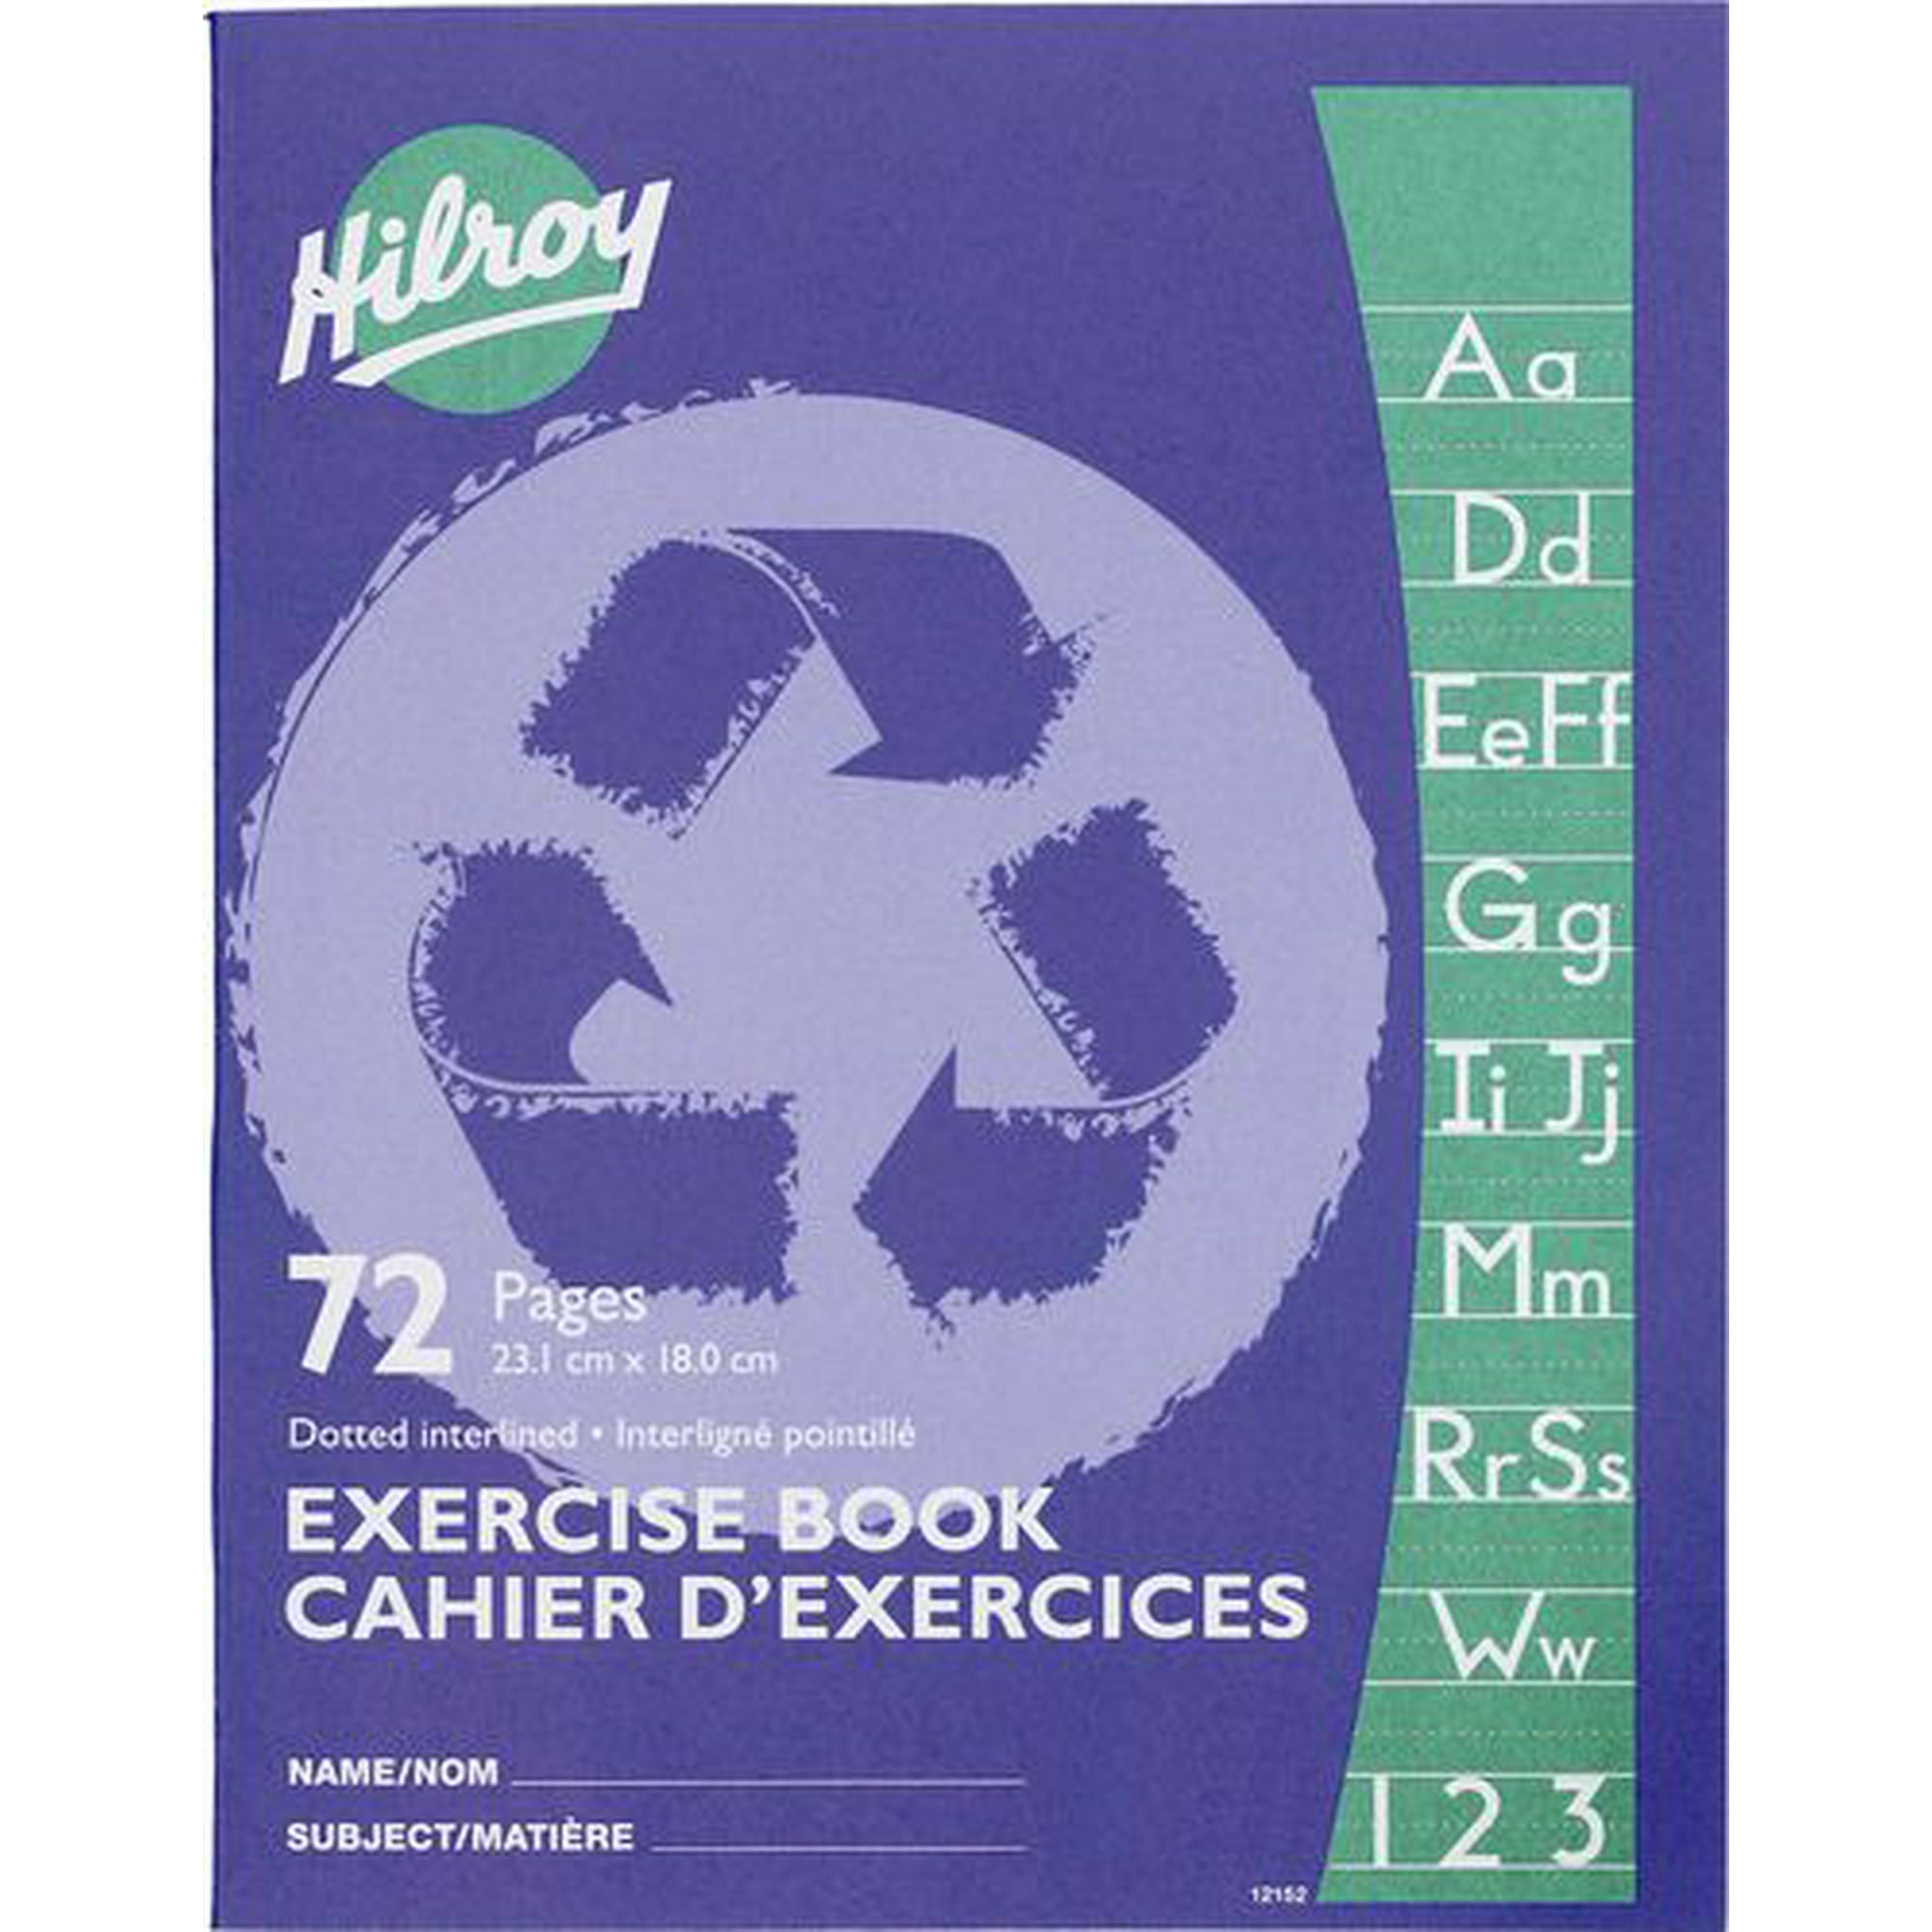 Hilroy Recycled Exercise Books, 72 Pages, Dotted Interline with